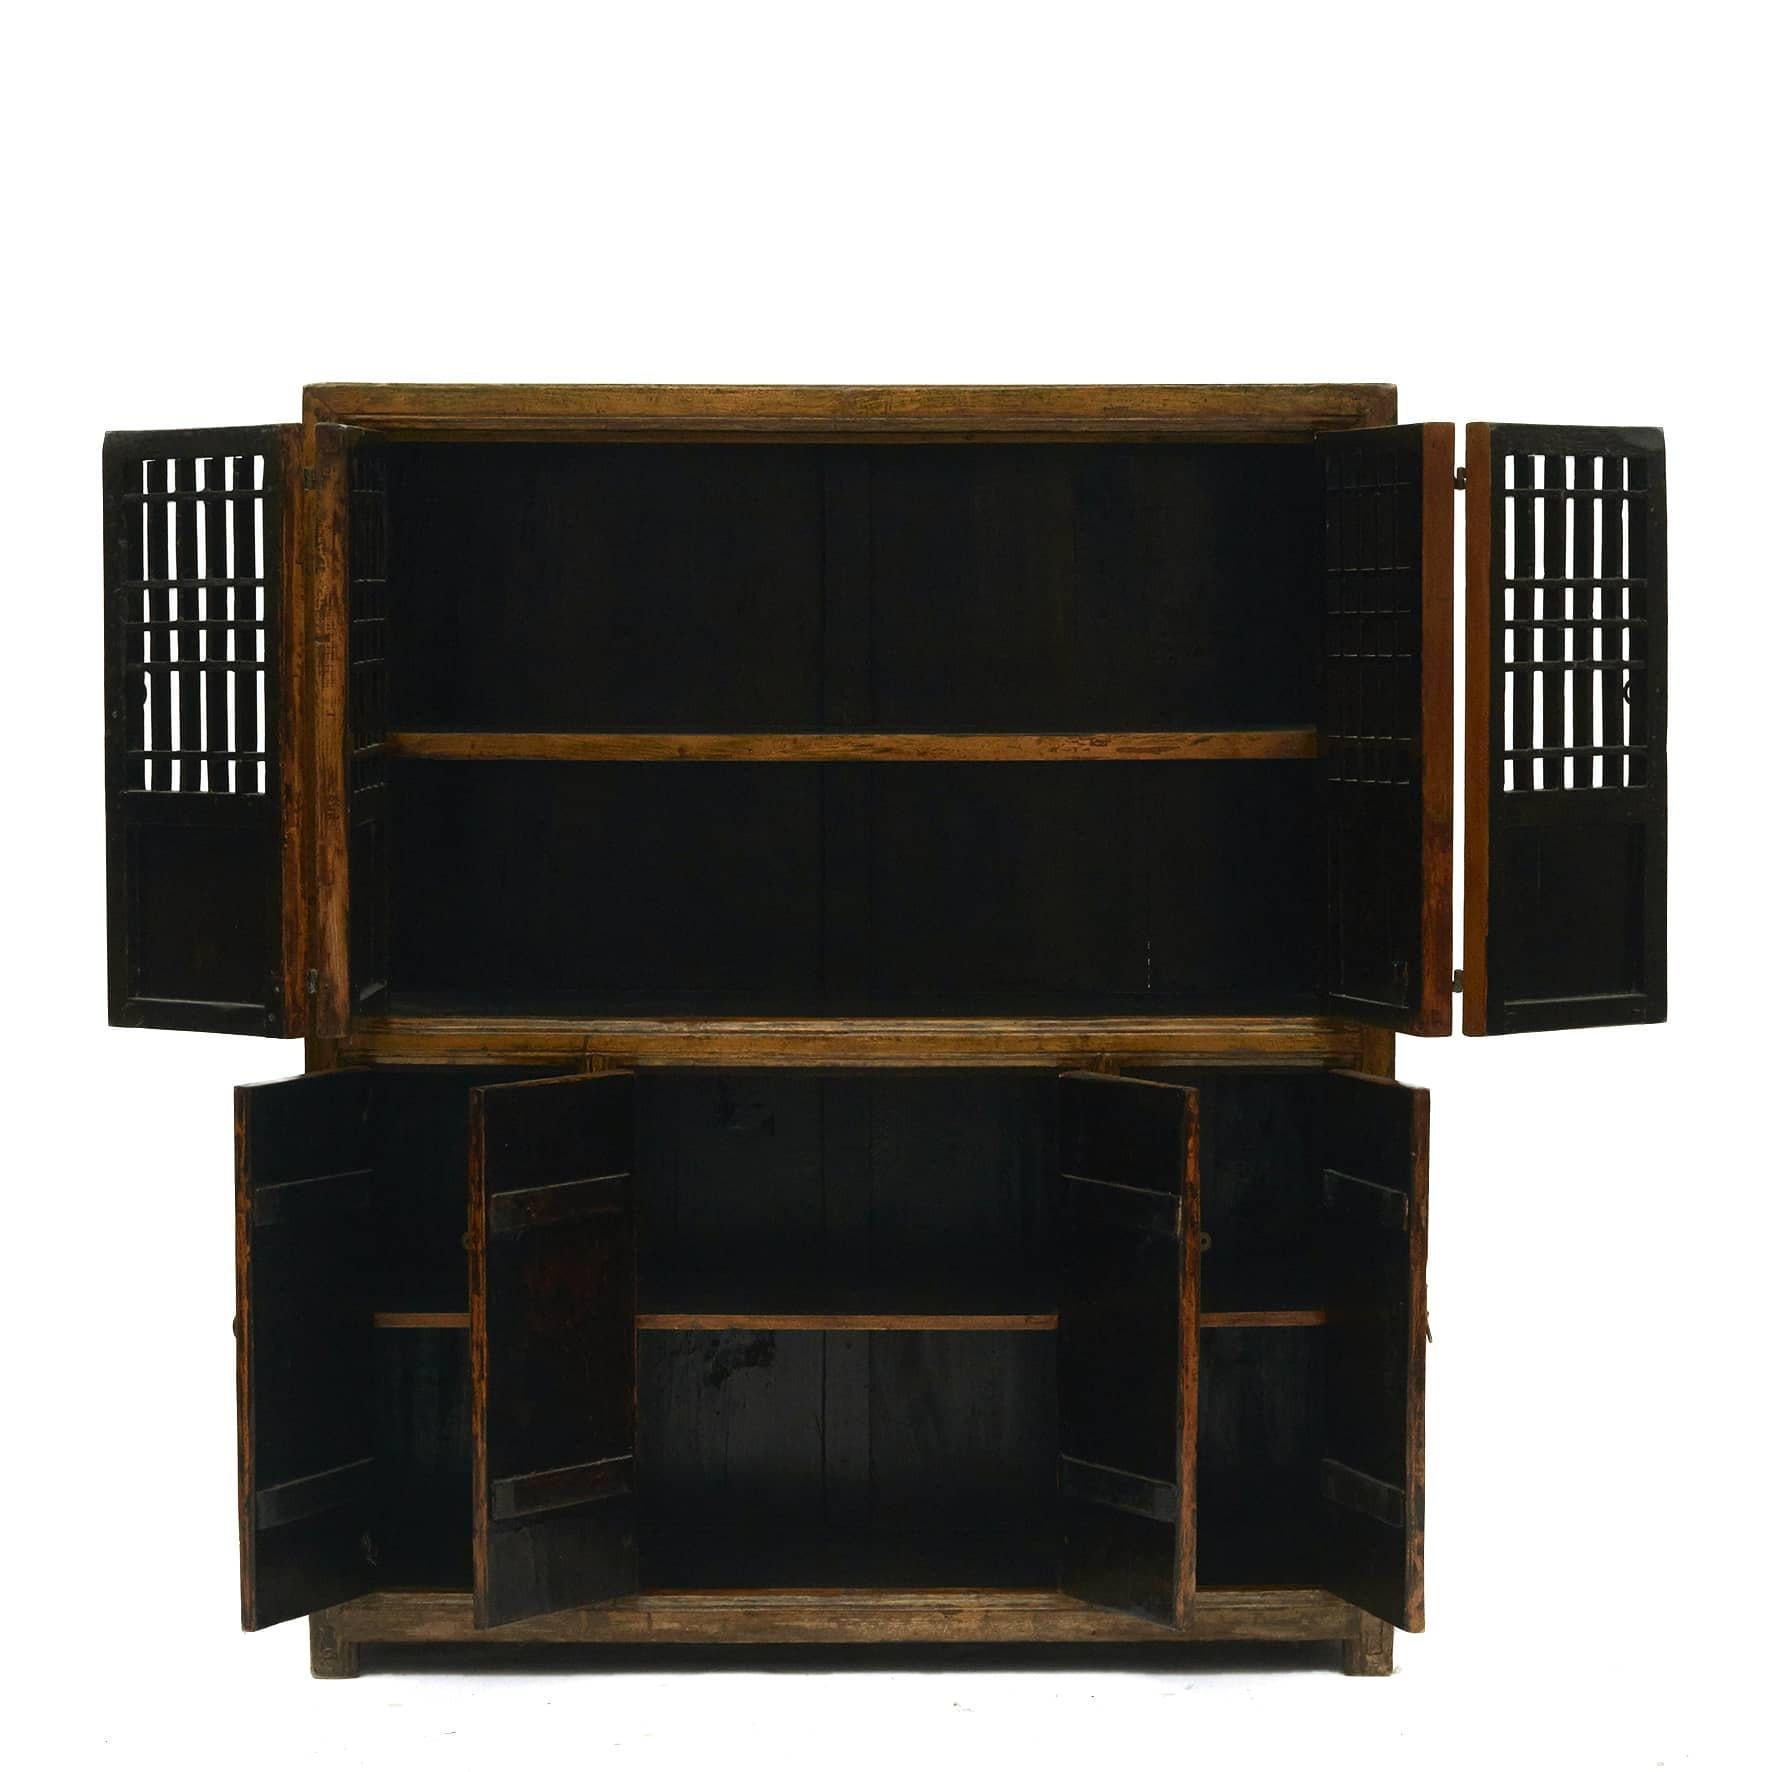 Metal Cabinet in Original Dark Yellow Lacquer, Shandong, China, 1850 -1870 For Sale